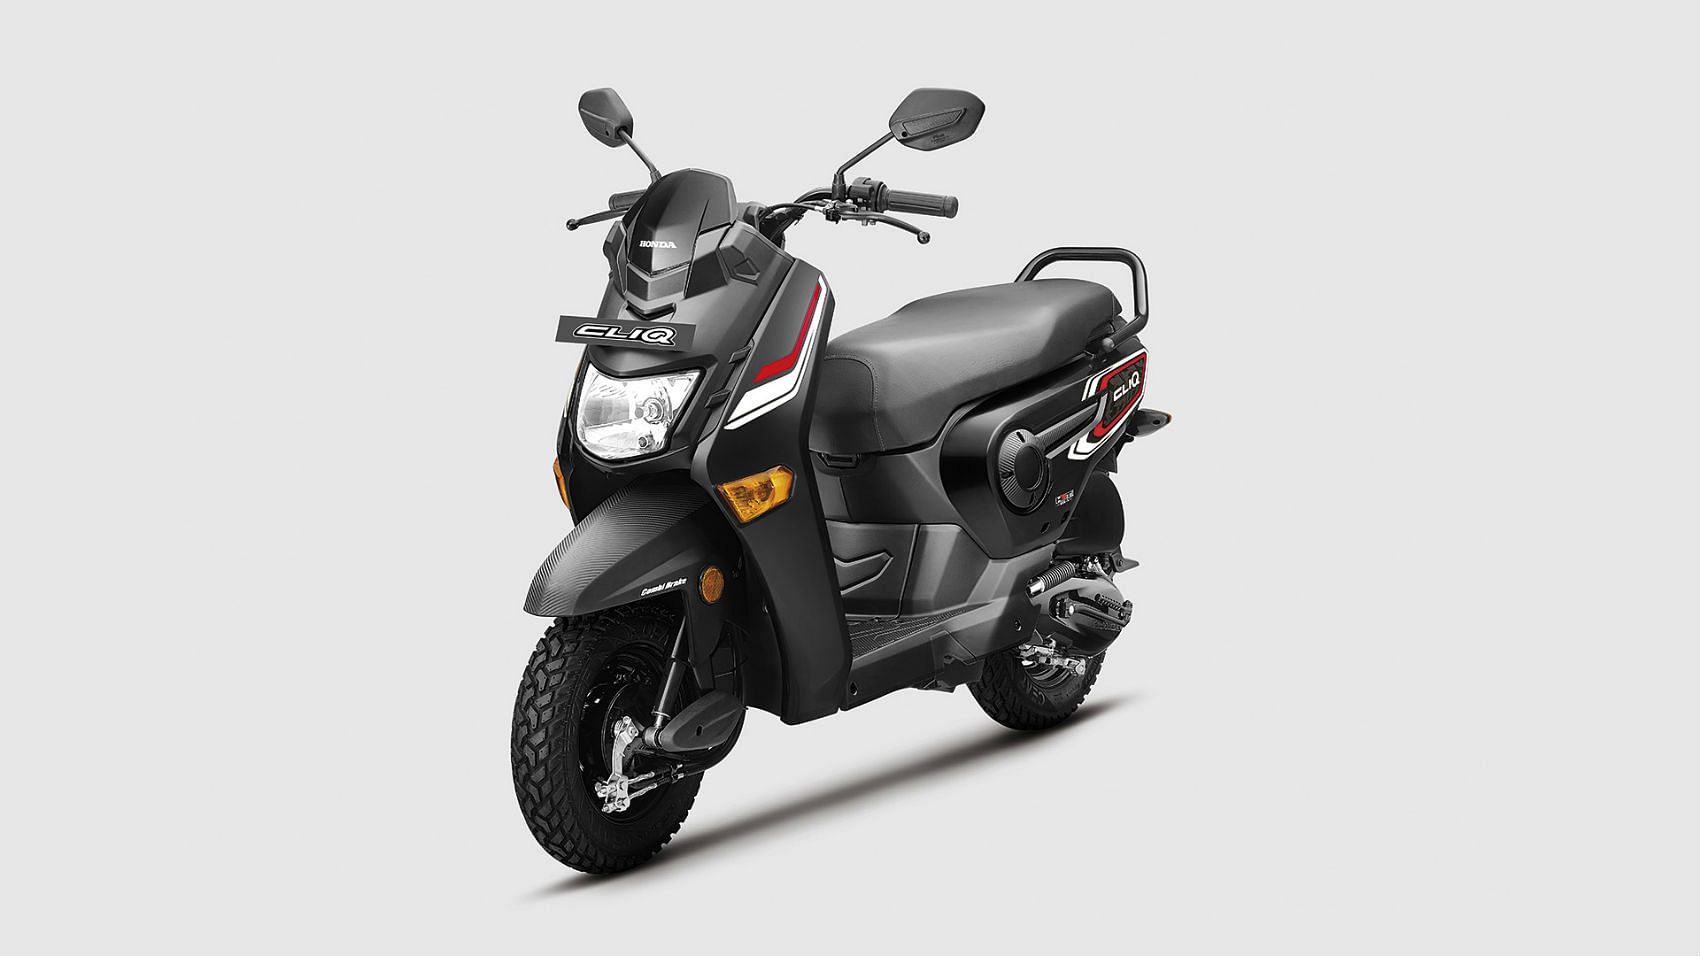 Honda Cliq is yet another intriguing two-wheeler option.